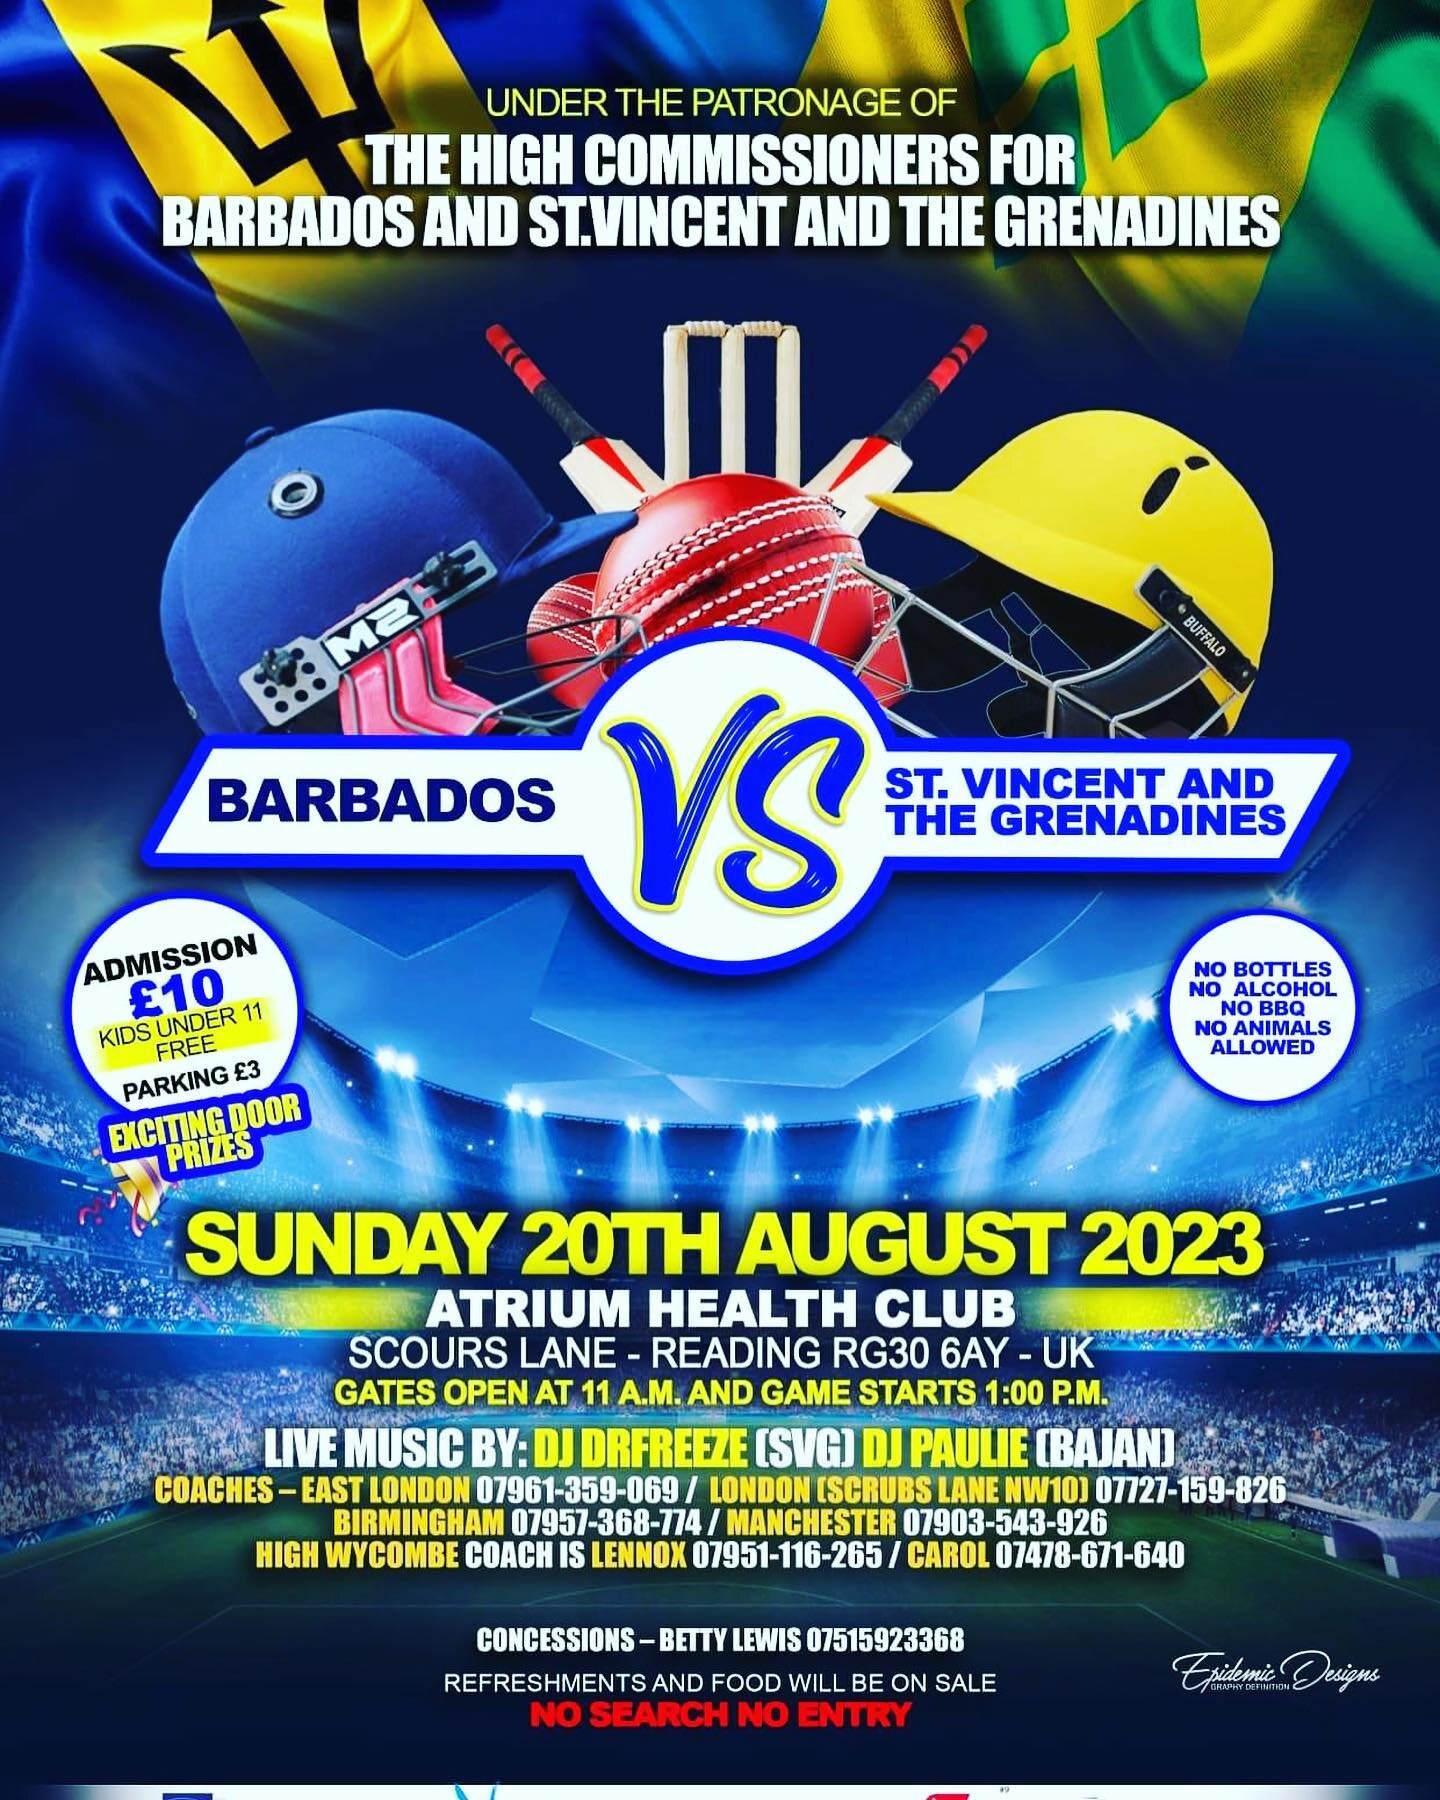 Off to Reading to watch the Barbados v St Vincent and the Grenadines cricket match 😎🇧🇧🏏 #barbados #barbadoscricket #windies #windiescricket #roadtrip